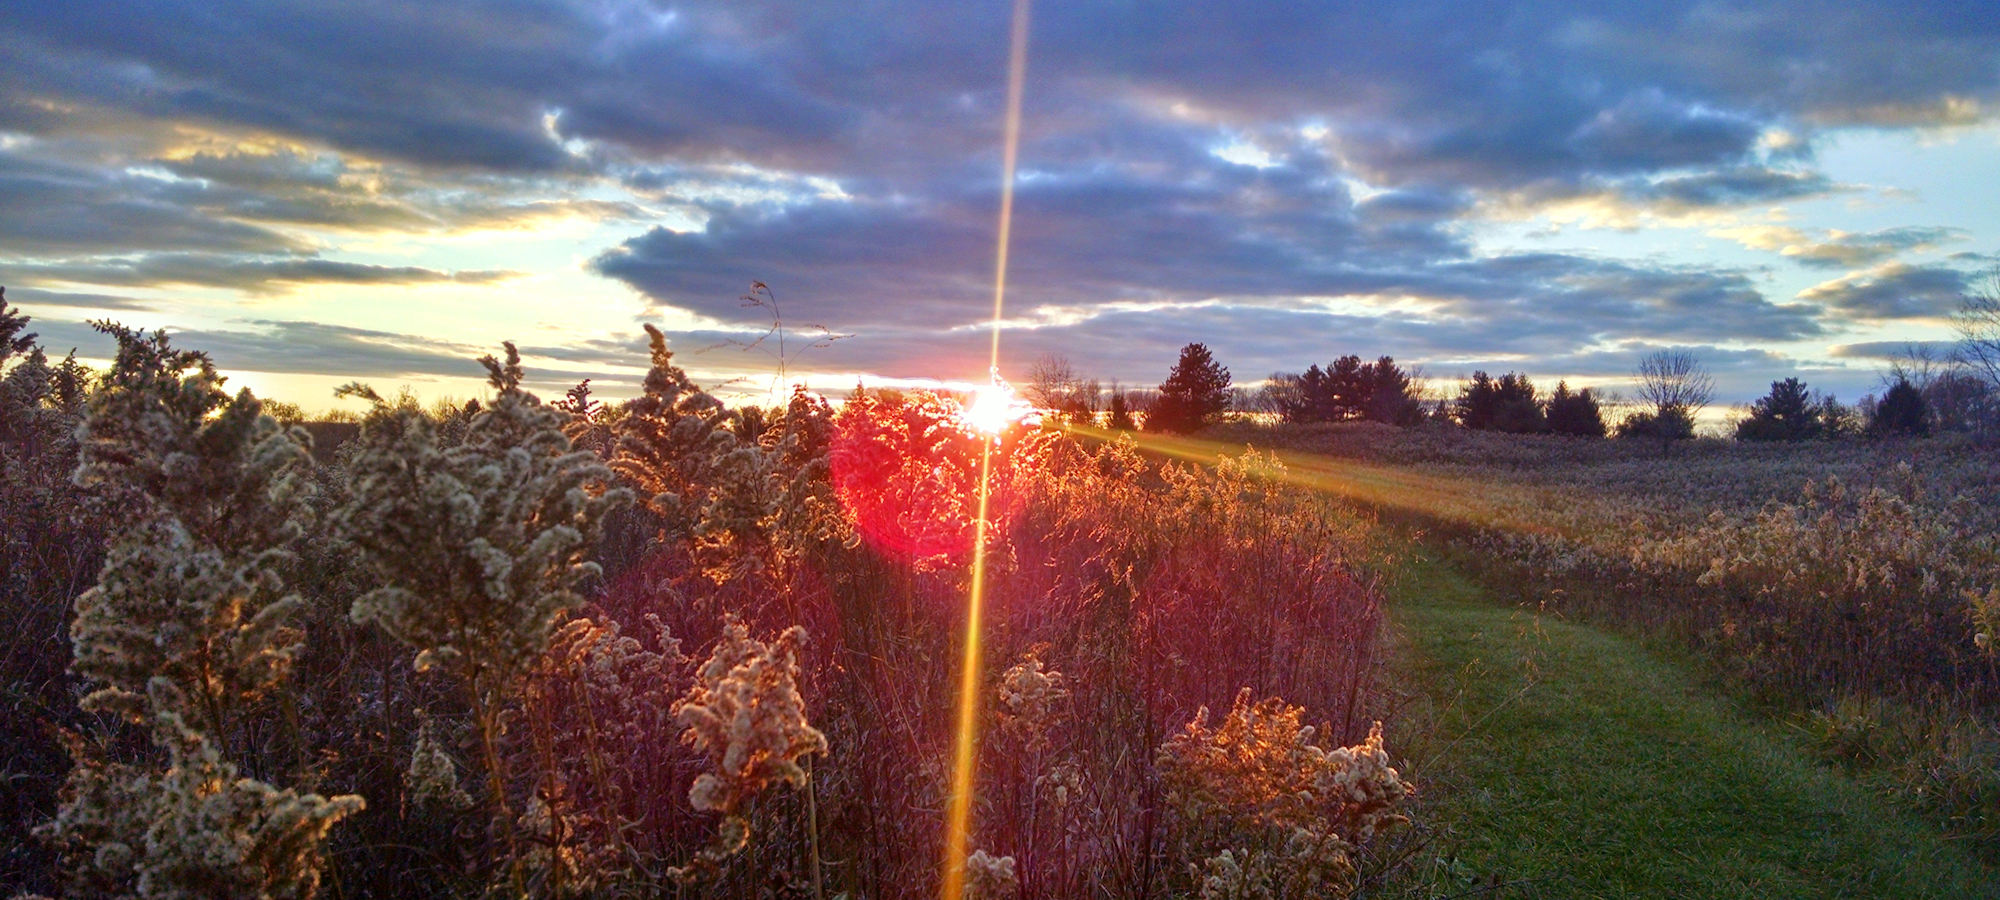 A sunset view of a field with a variety of plants and trees